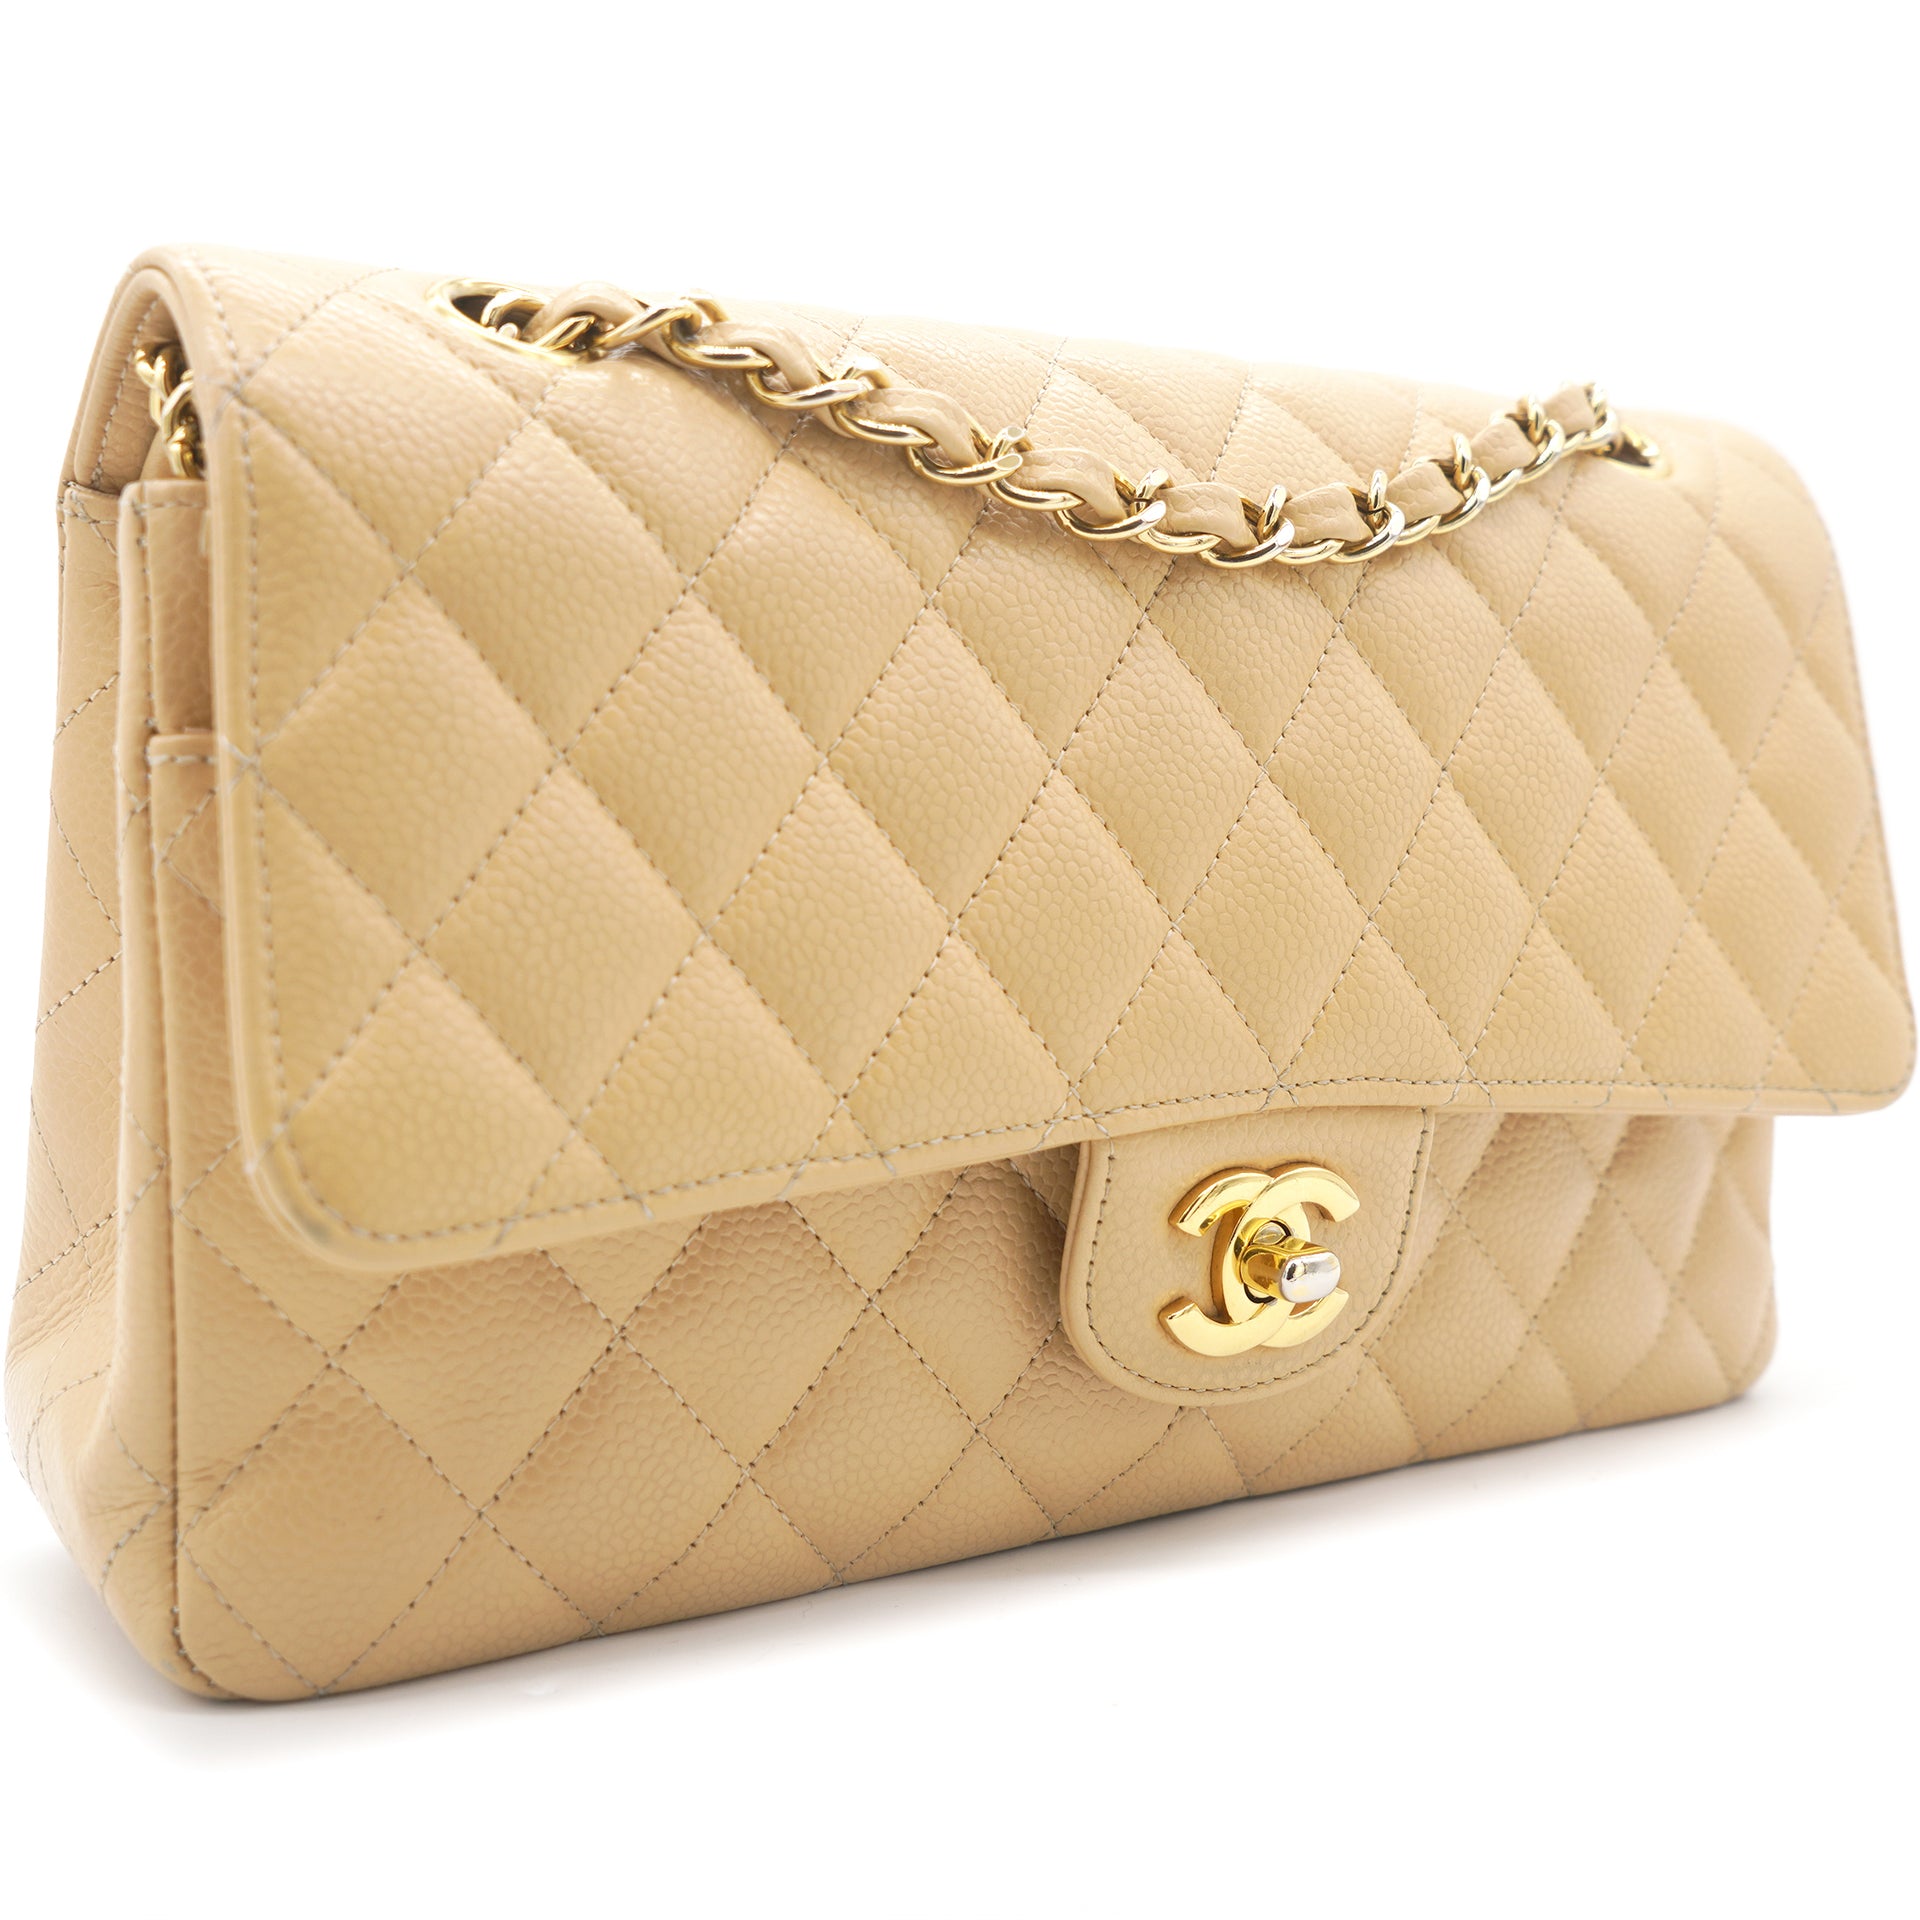 Chanel PST Petit Shopping Bag Caviar beige with gold hardware